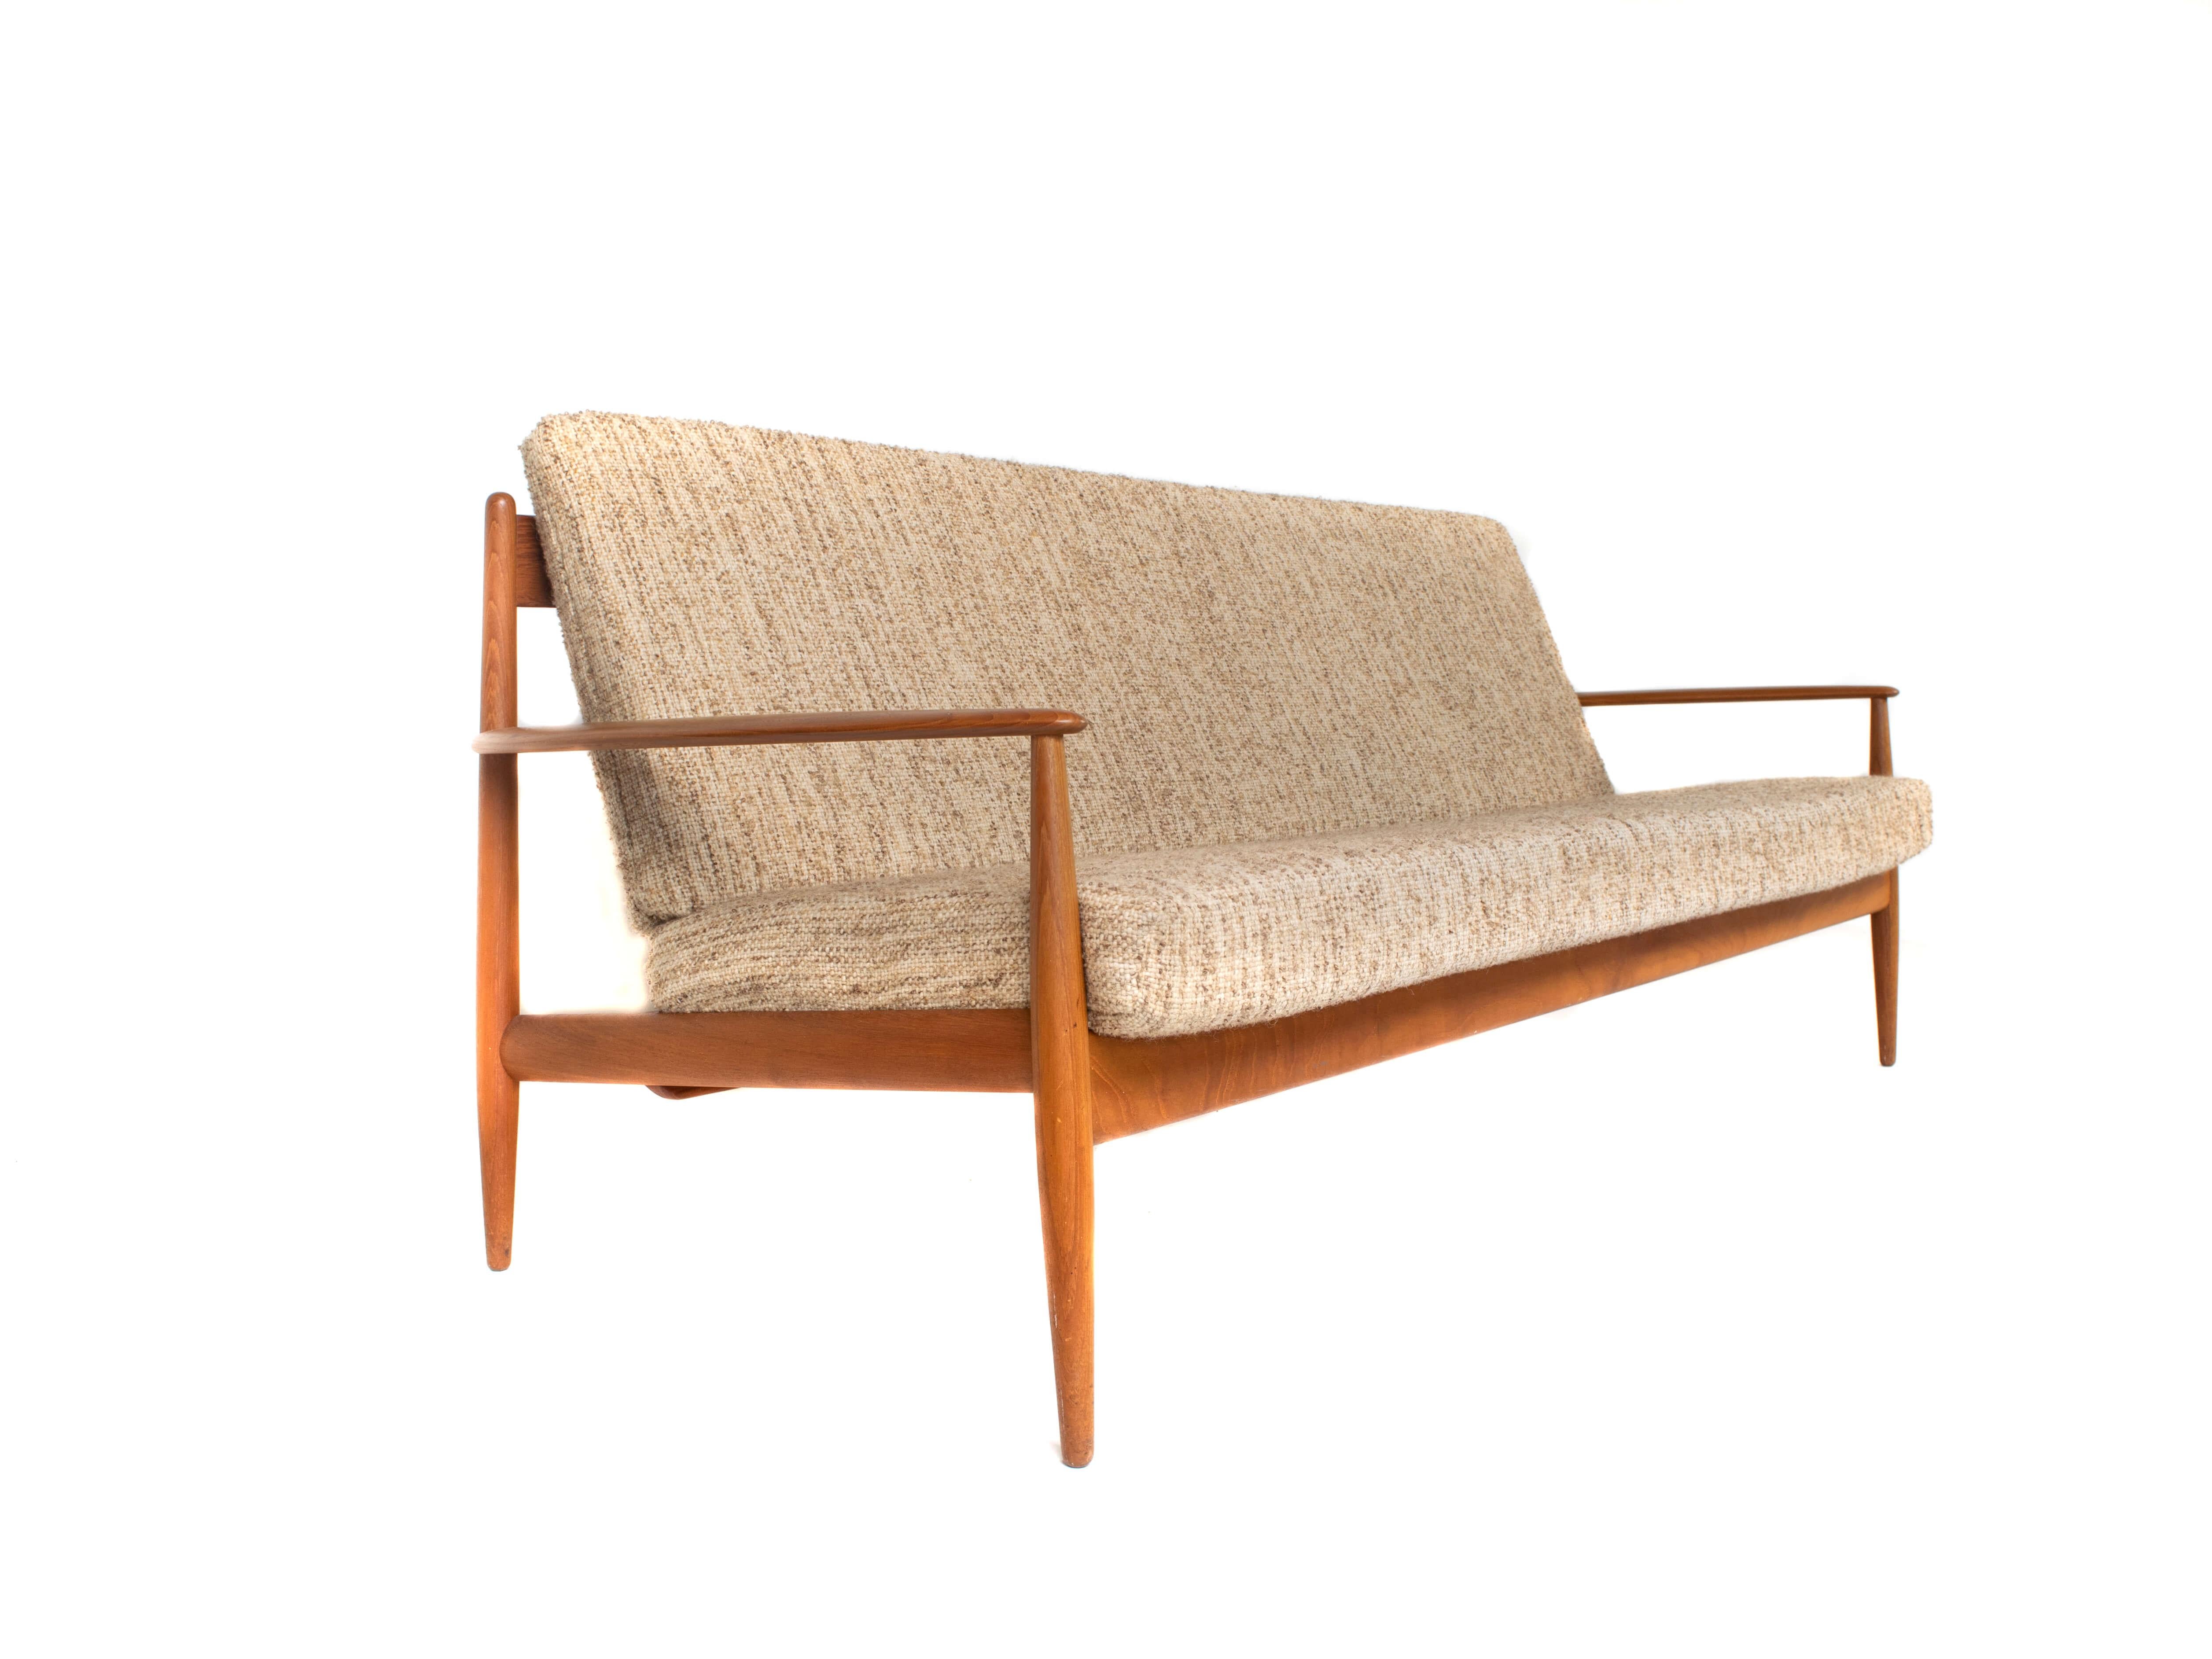 Grete Jalk three-seat sofa for France & Søn, Denmark 1960s. It is in excellent condition with no need for upholstery as the fabric is excellent. The sofa is made with an inside of springs, which can be your preference or not. The sofa has an